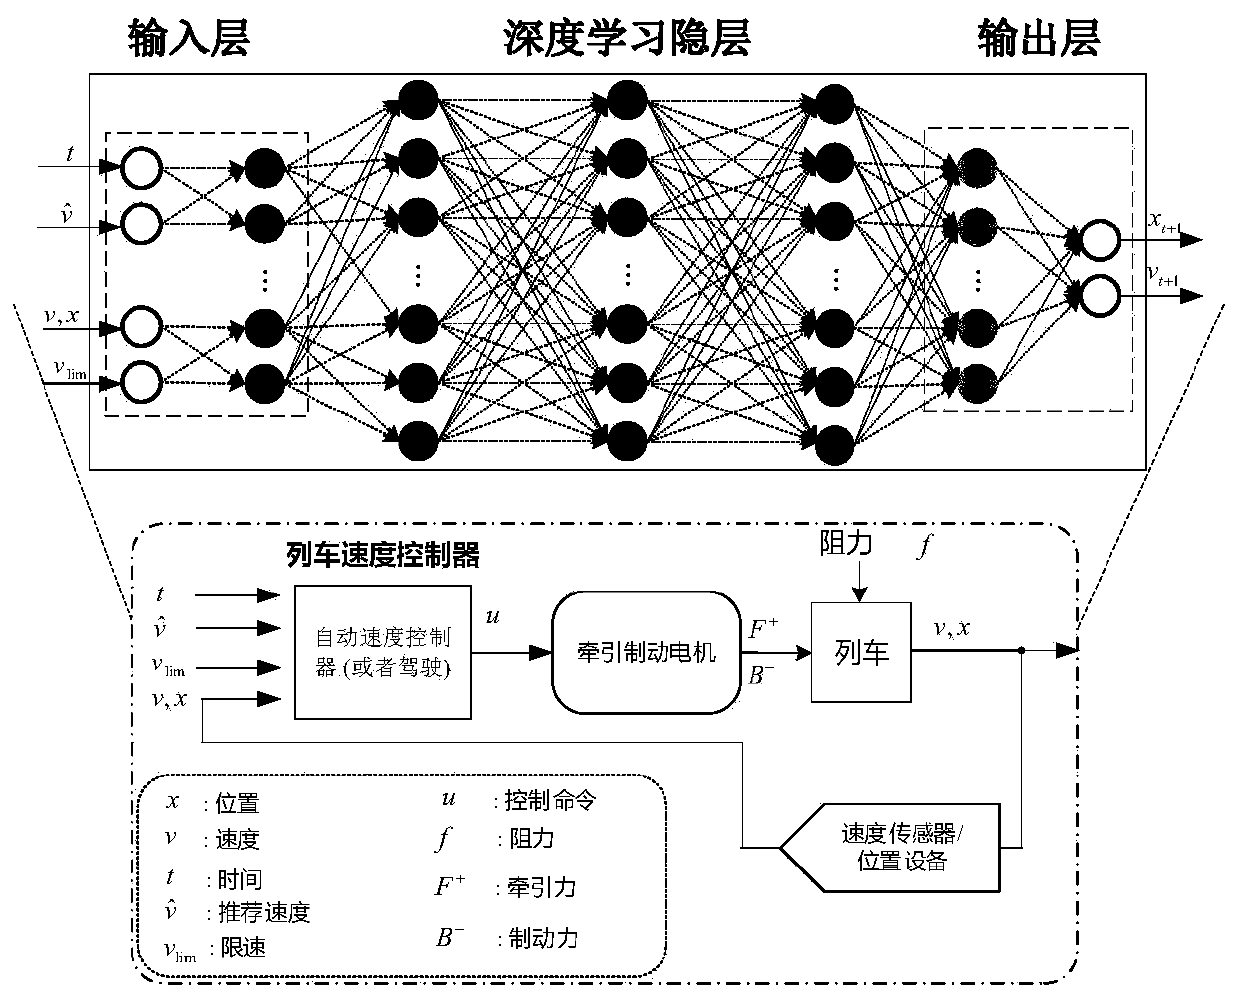 Rail train operation state prediction method based on a deep neural network structure model